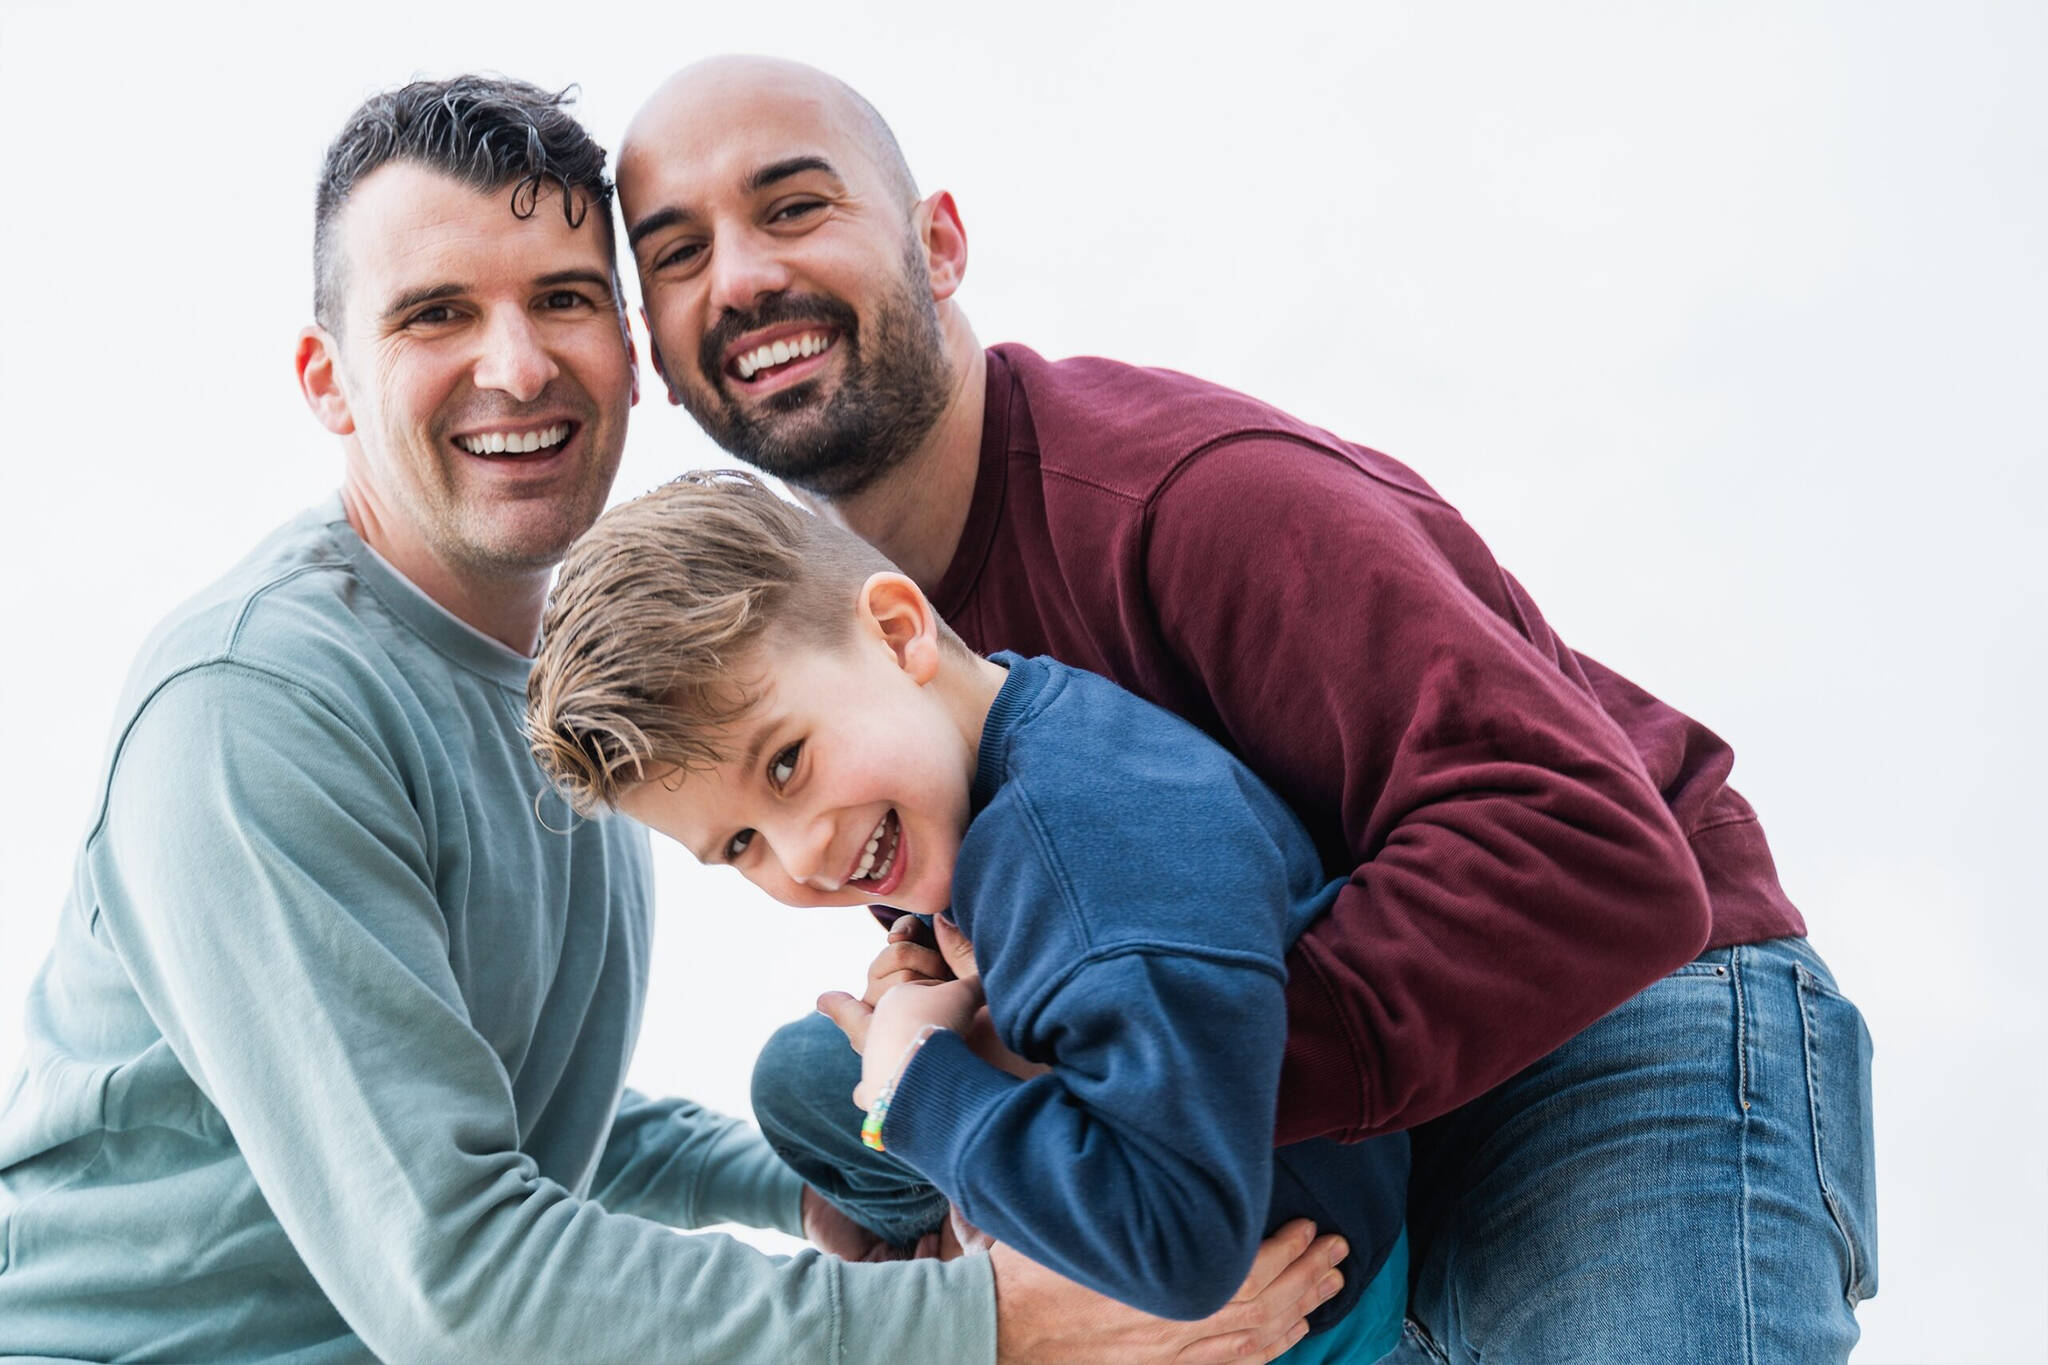 A University of British Columbia expert says the image of “white, affluent men” isn’t an accurate portrayal of gay dads across North America – and it can have real-world implications. (Image: UBC)